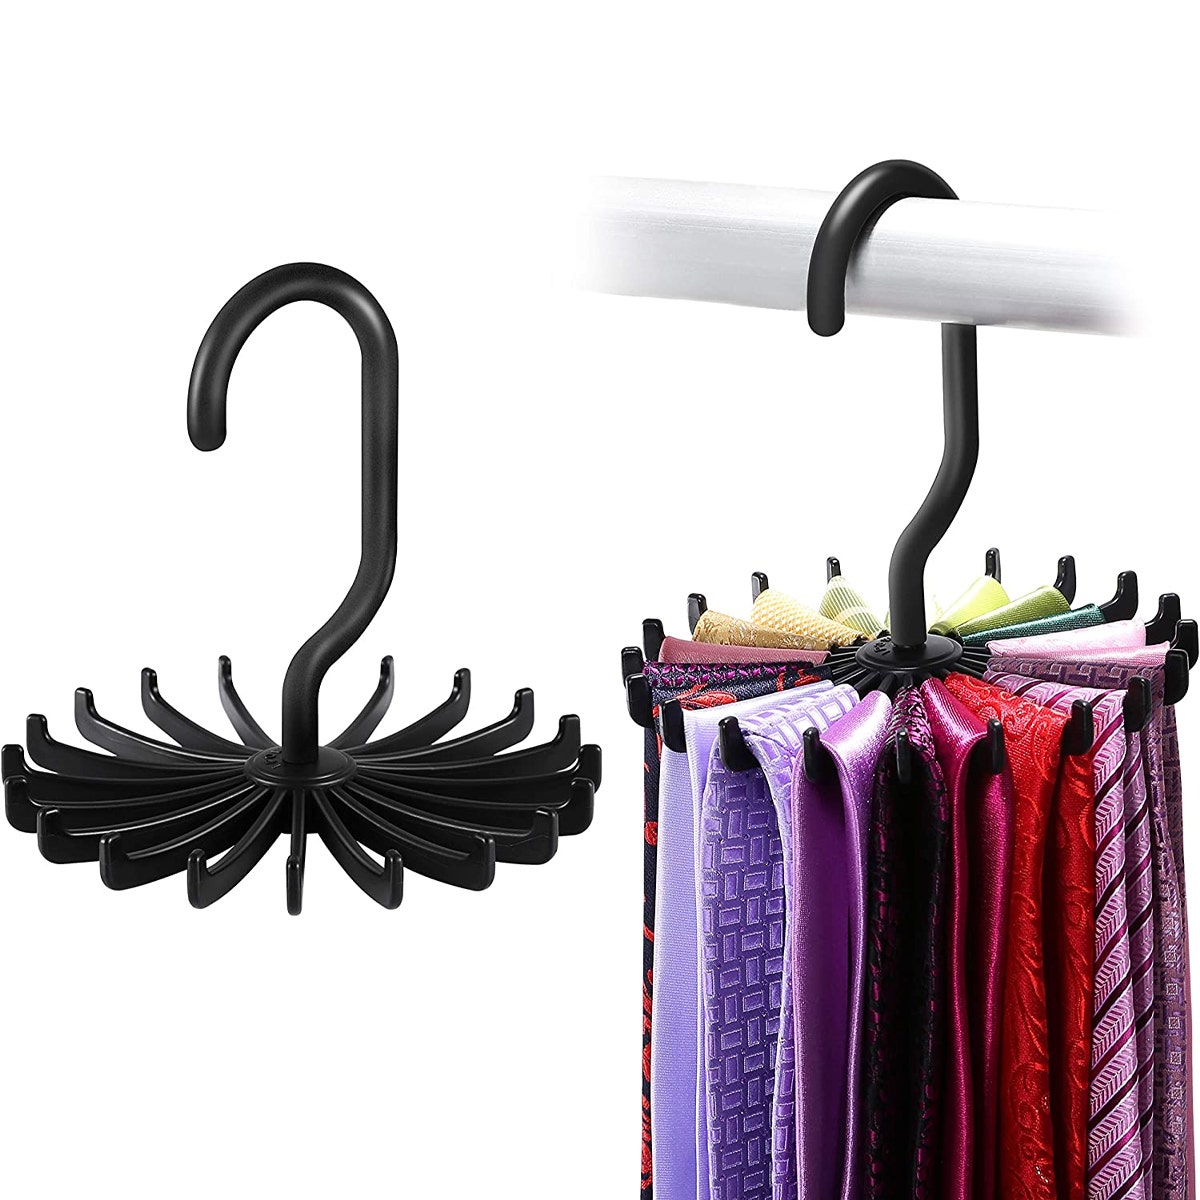 Closet Complete Twirling Tie Rack – Holds 20 Ties Or Belts